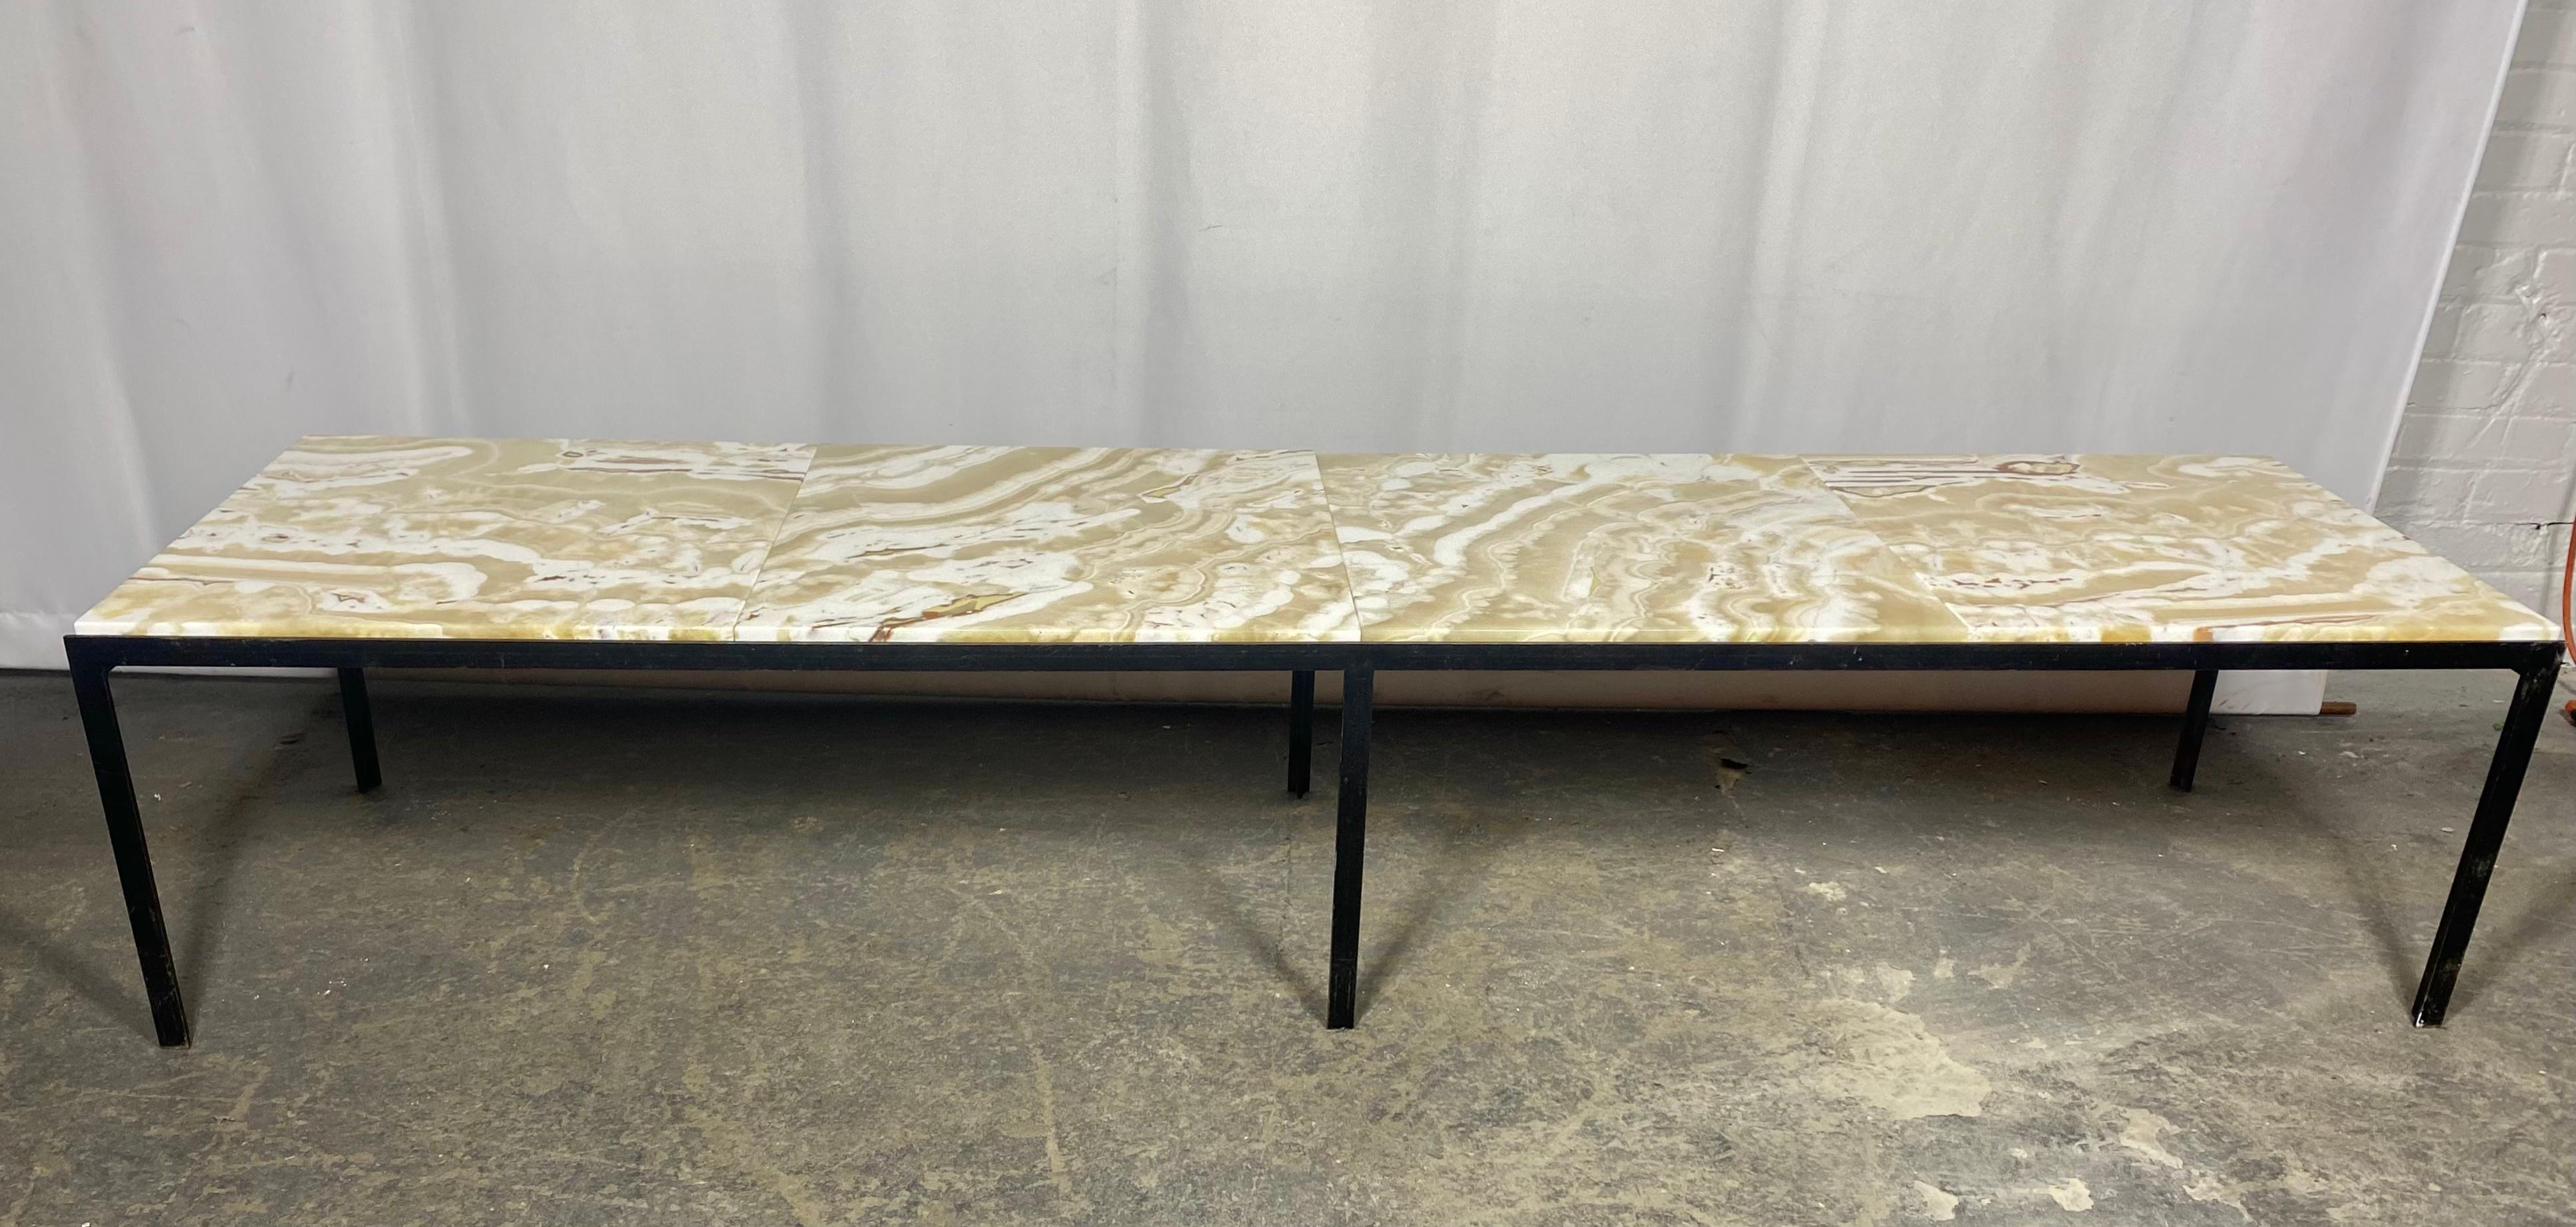 Early T Angle Onyx Coffee Table / Bench by Florence Knoll # 332 for Knoll  For Sale 2